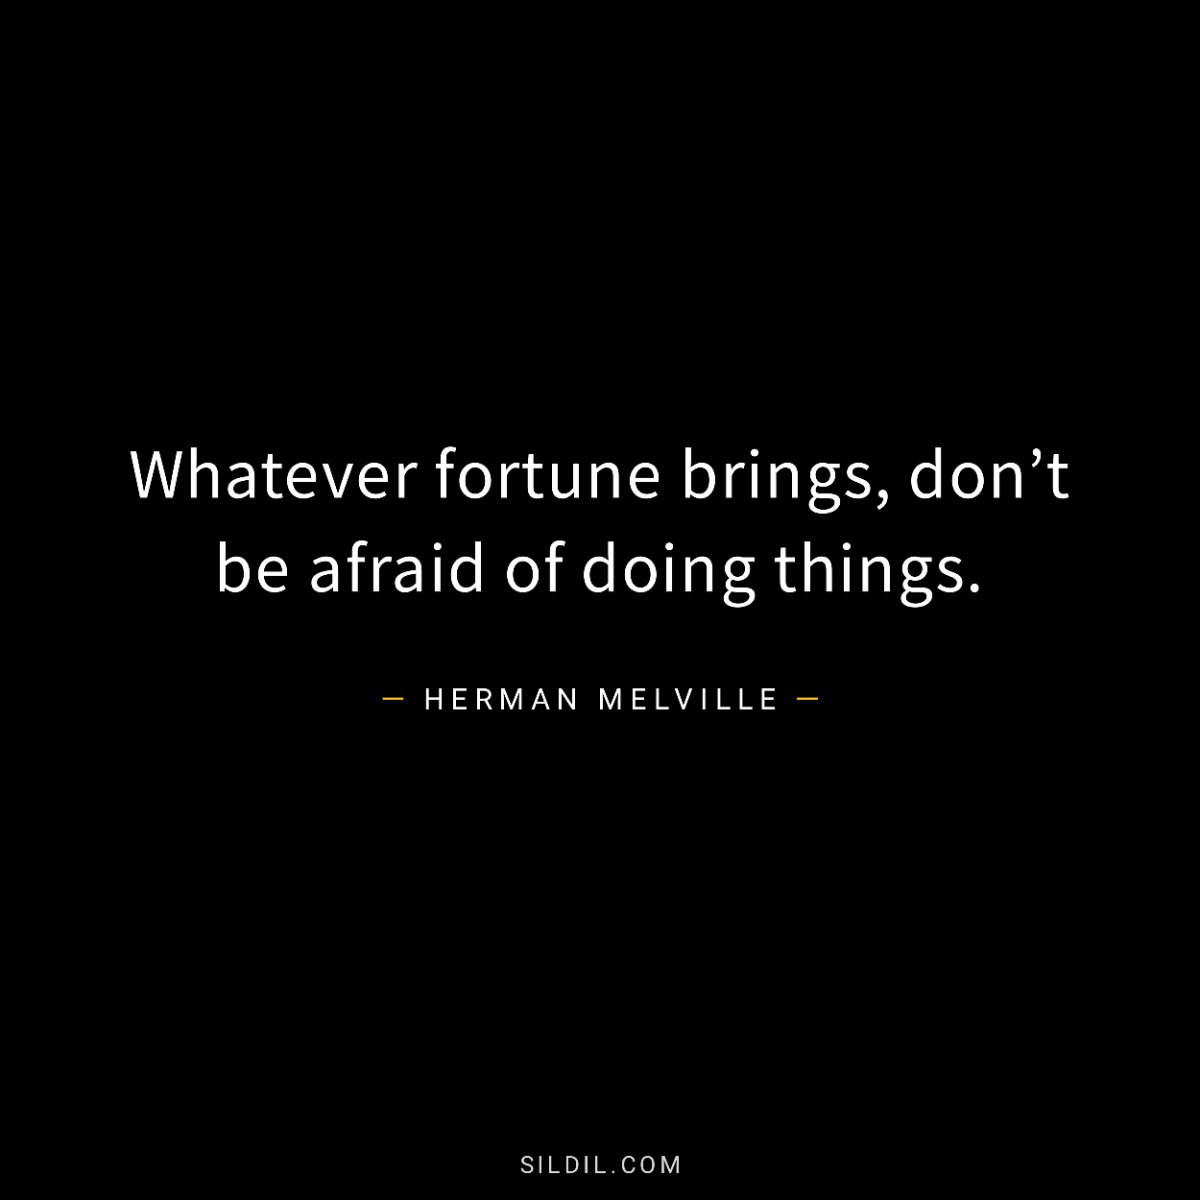 Whatever fortune brings, don’t be afraid of doing things.